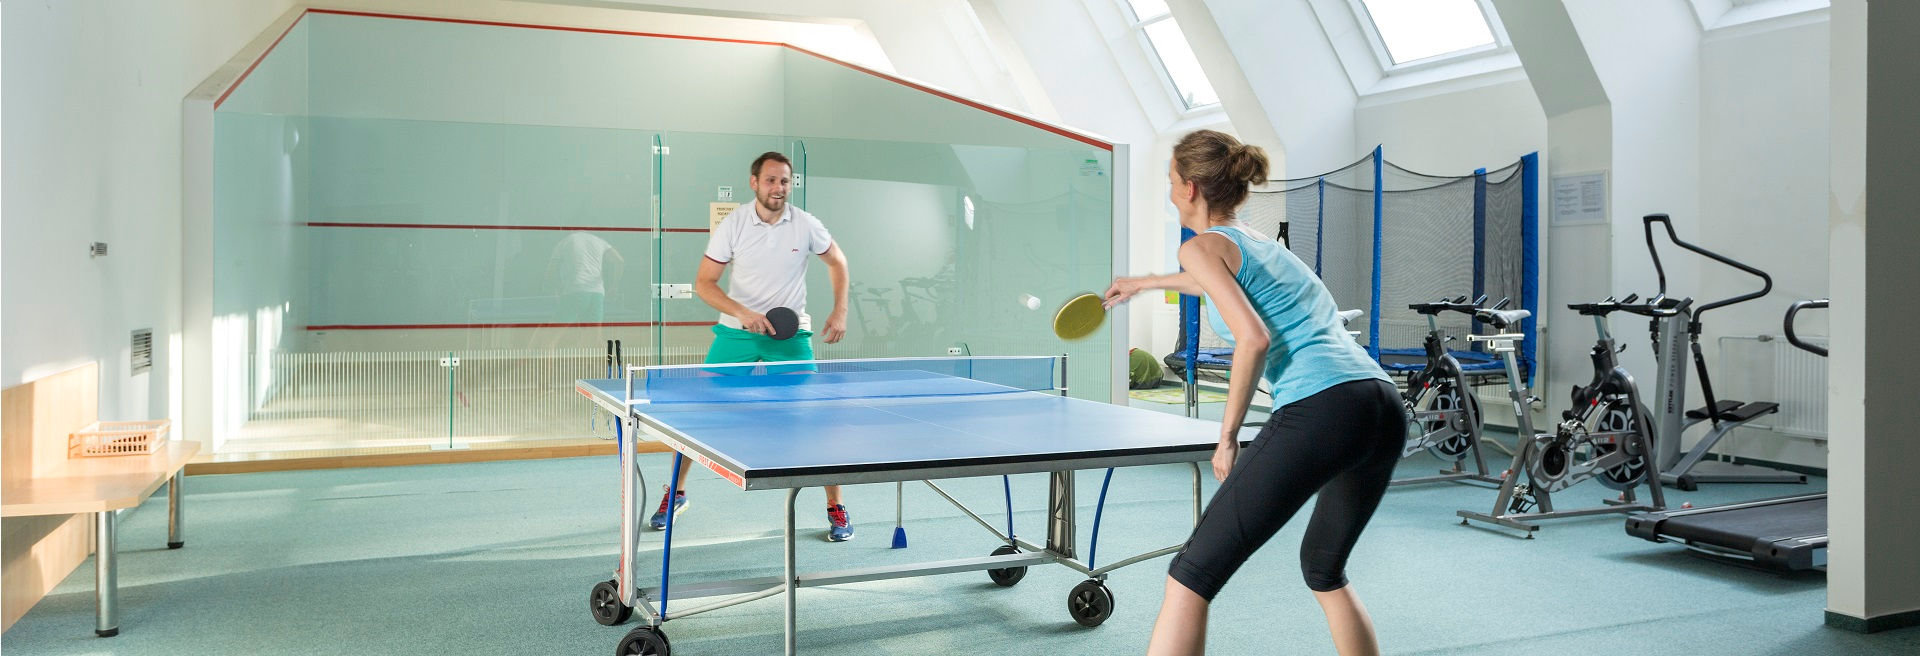 Squash and table tennis in Wellness hotel DIANA in Jeseniky mountains